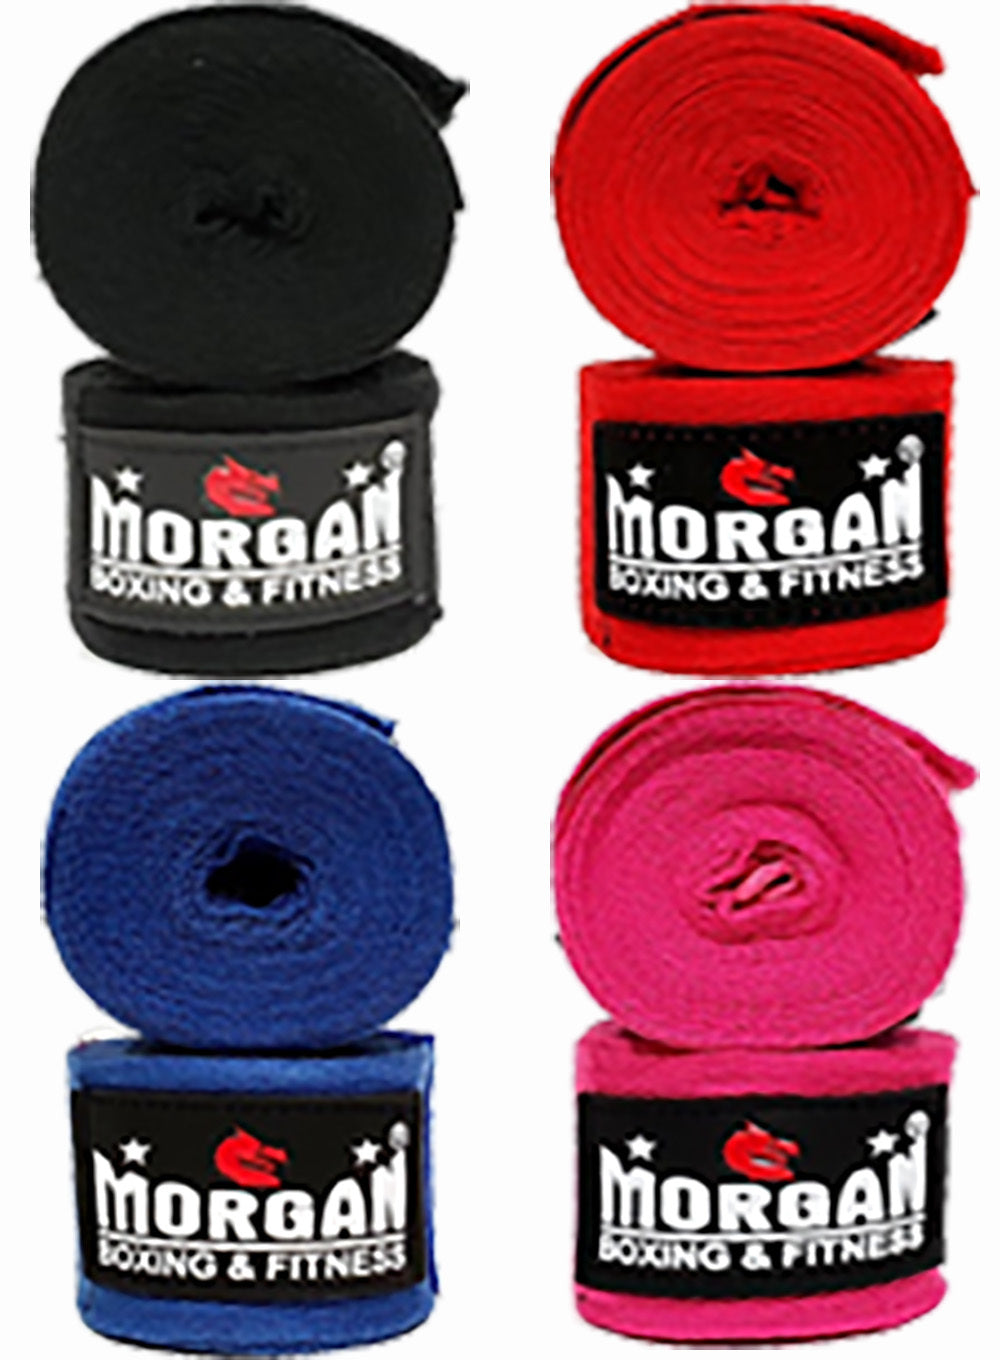 Fitness Hero offers the Morgan cotton hand wraps. These cotton hand wraps offer enhanced thickness. They measures 4 metres in length so you can completely wrap your wrists, hands, and knuckles for maximum support and protection without being bulky underneath the gloves. available in four colours.